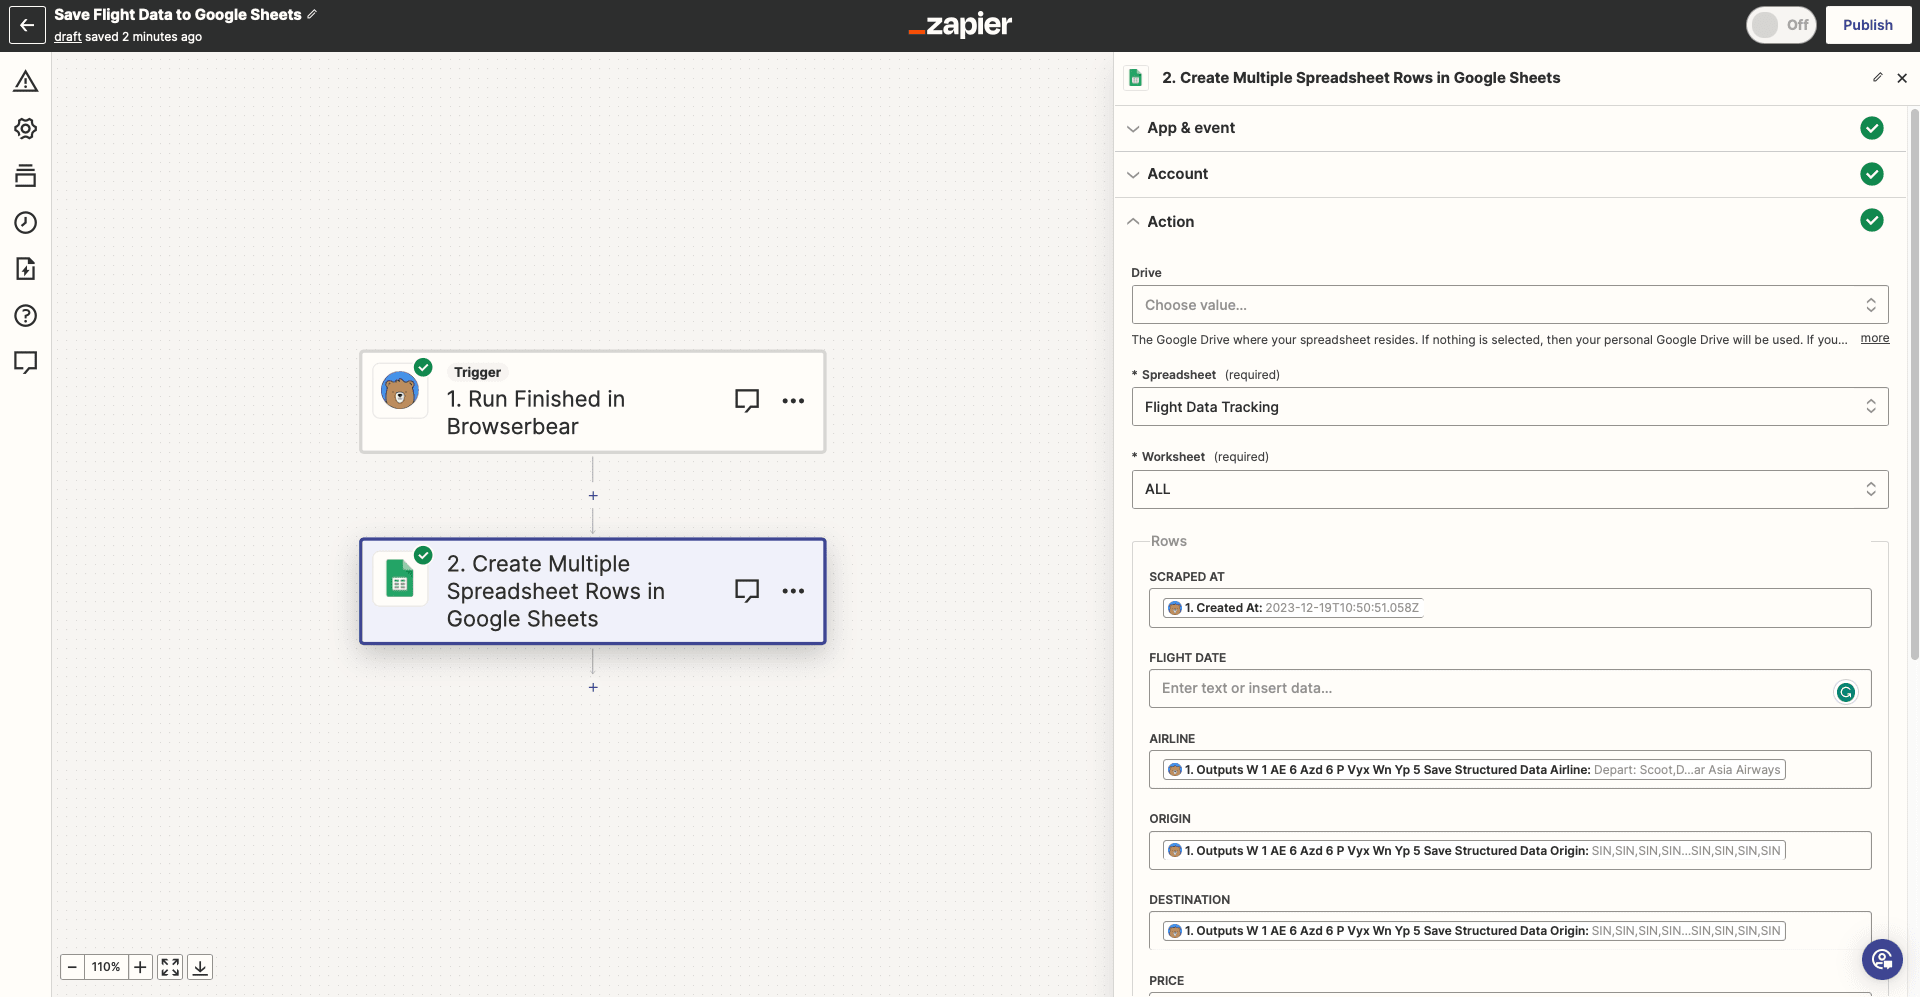 Screenshot of Zapier Create Multiple Spreadsheet Rows in Google Sheets action